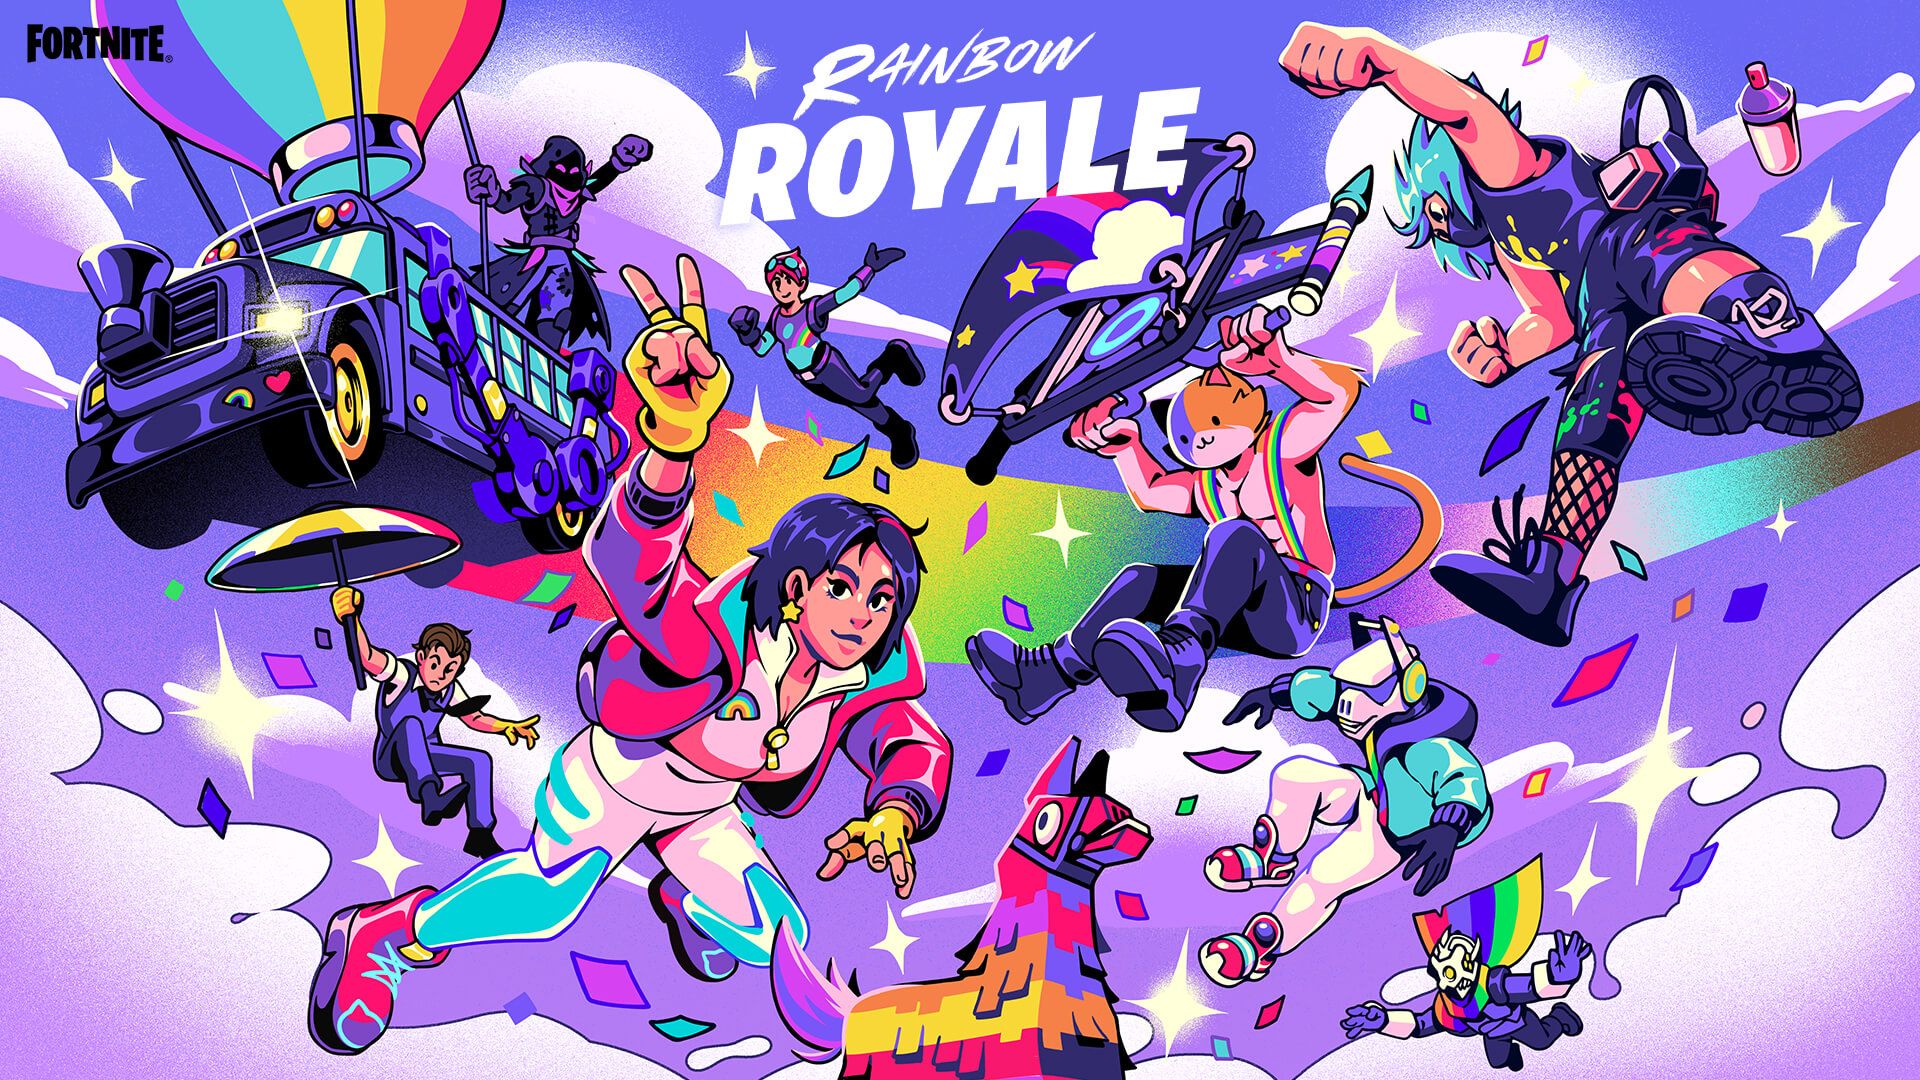 Rainbow Royale is here!